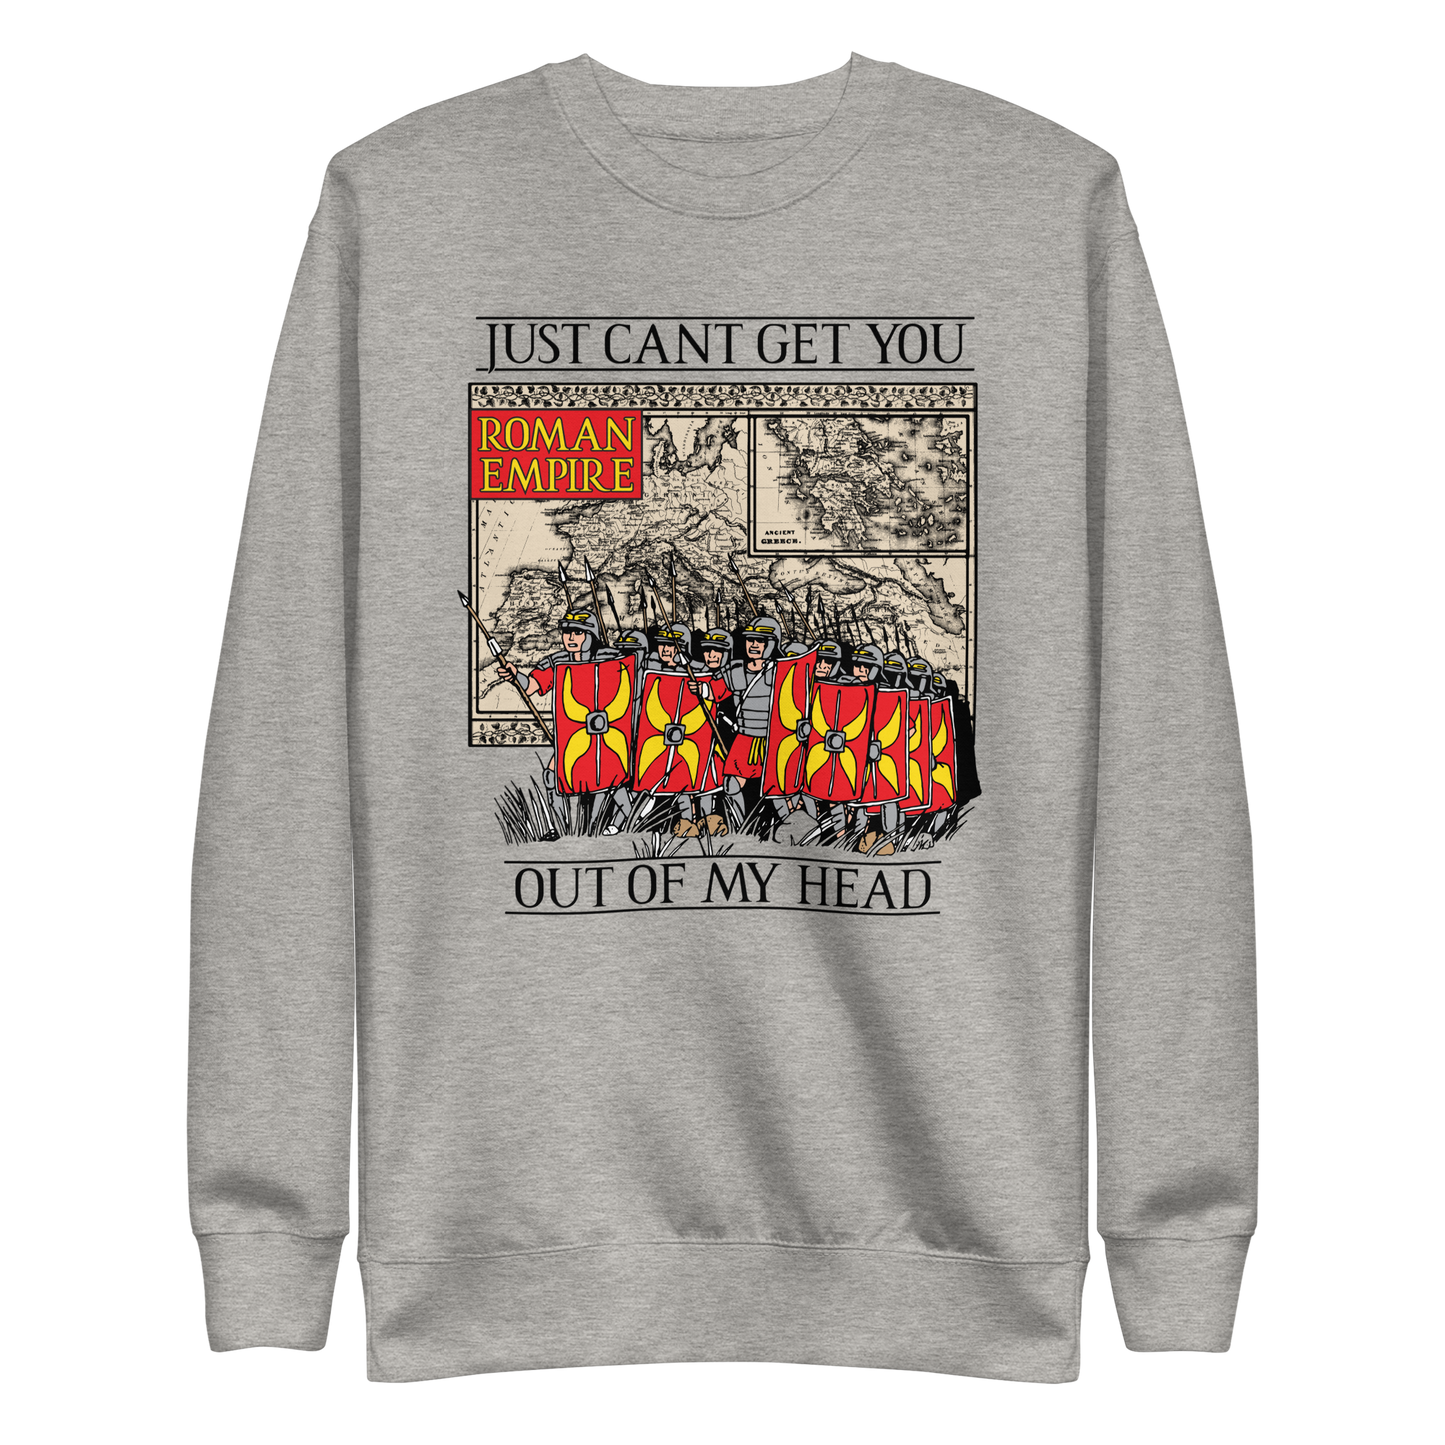 Just Can't Get You Out Of My Head Crewneck.